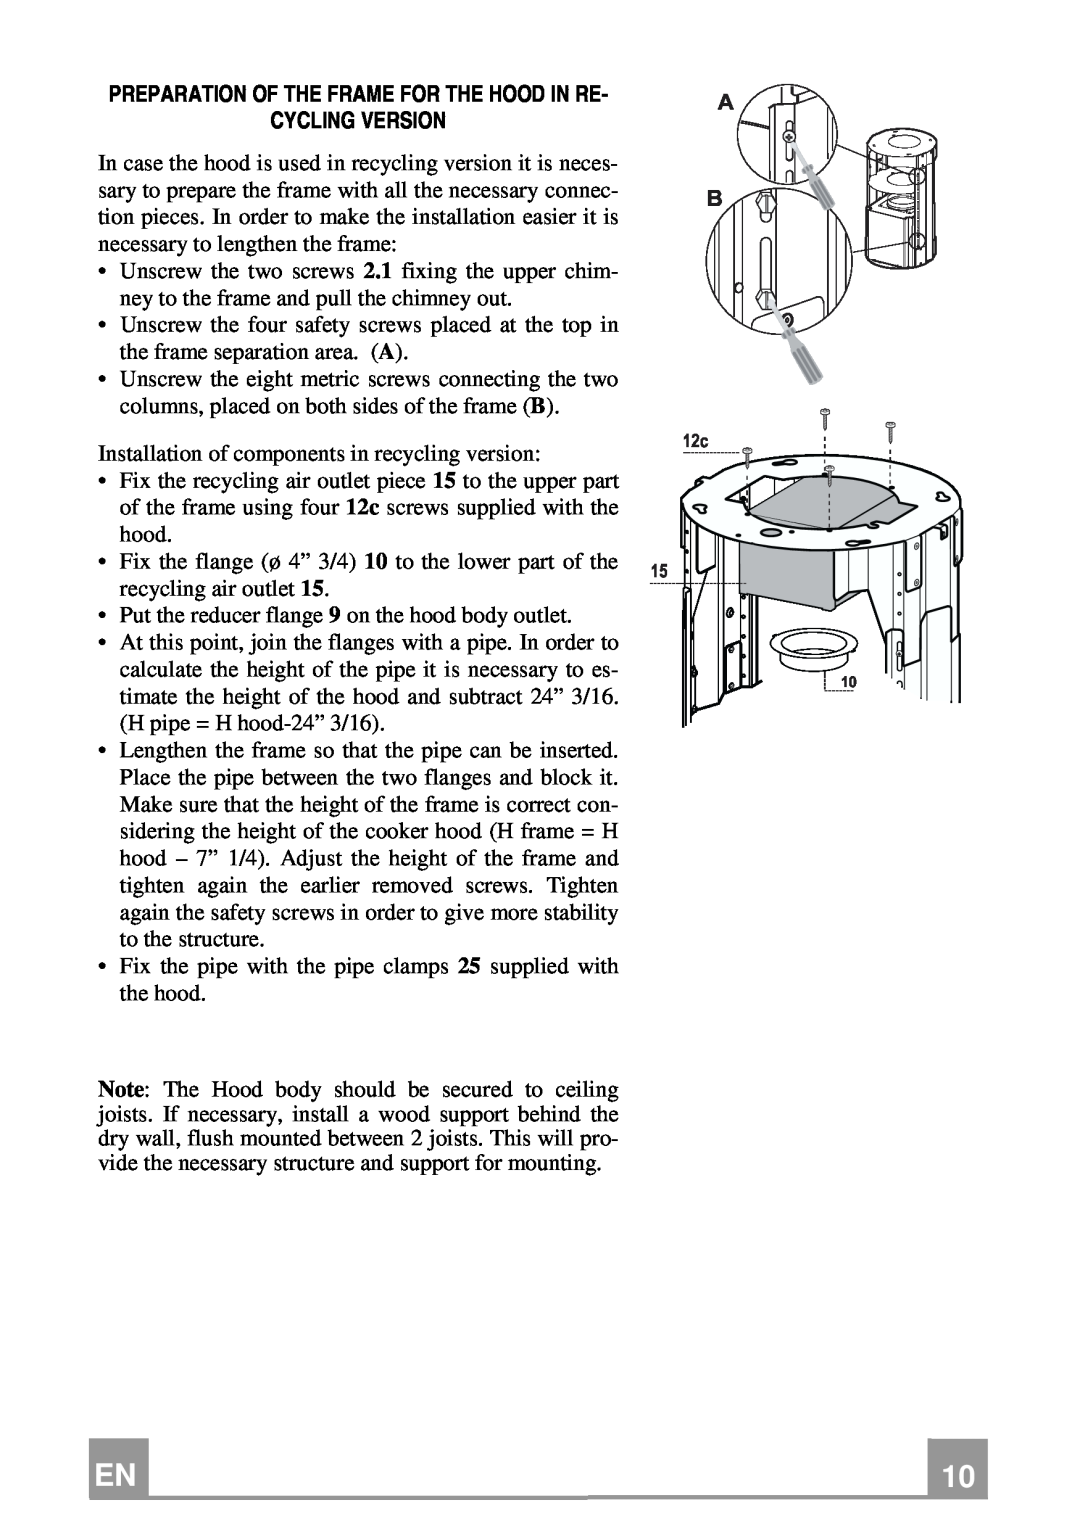 Franke Consumer Products FTU 3807 I installation instructions Preparation Of The Frame For The Hood In Re Cycling Version 